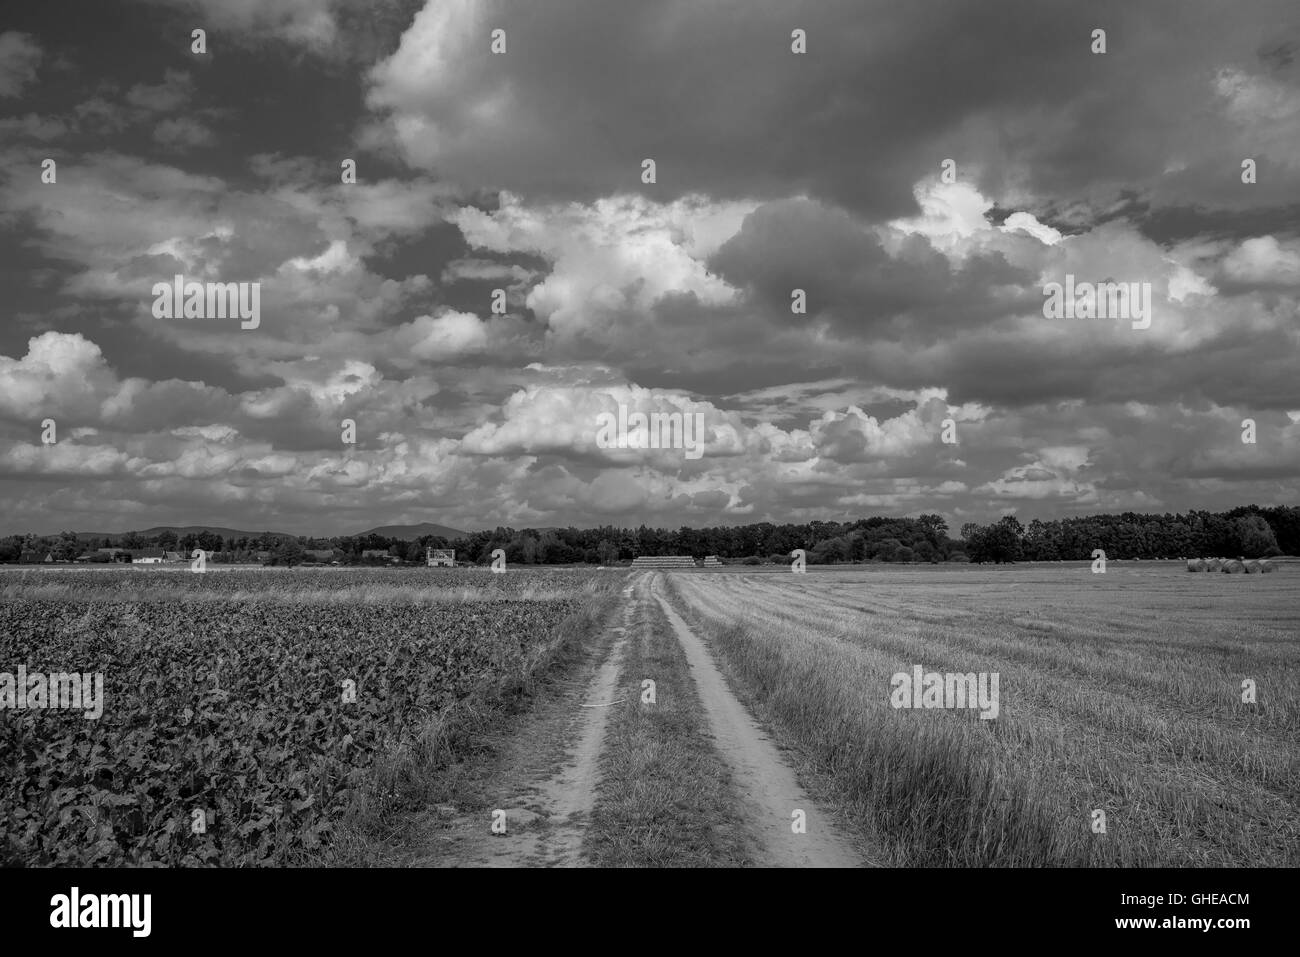 Dirt straight road among fields cloudy sky Lower Silesia Poland Stock Photo